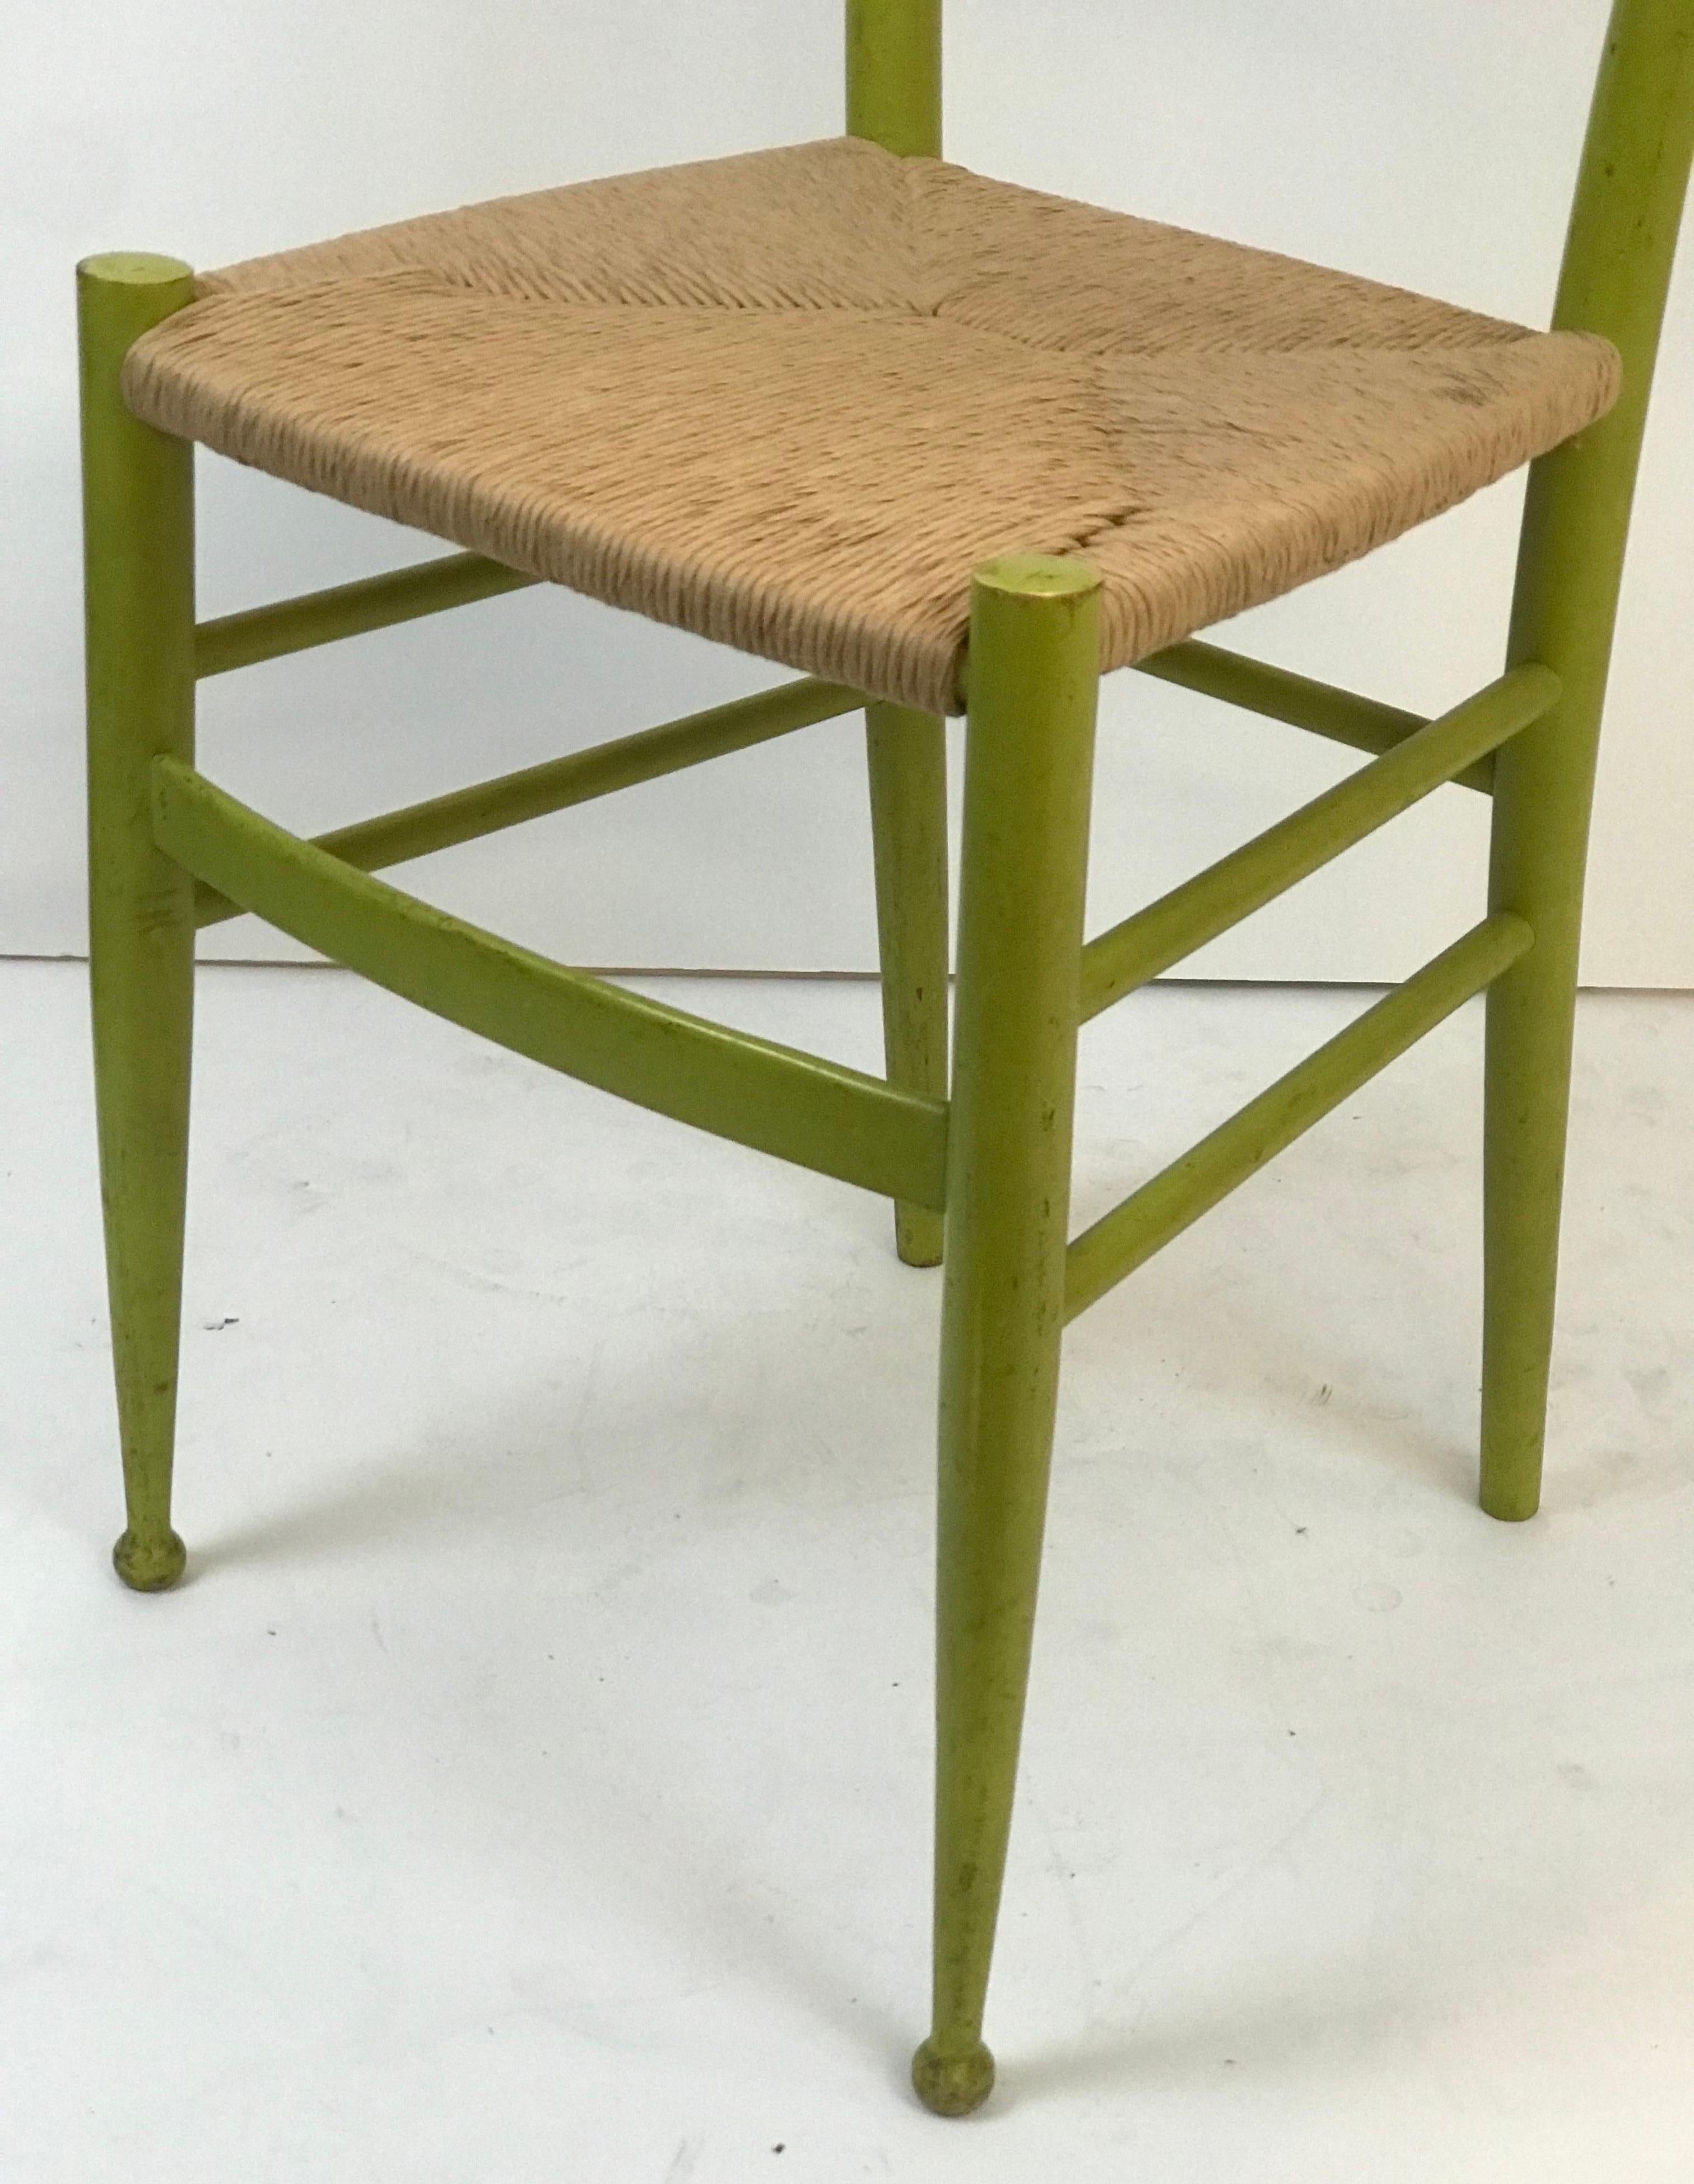 Cane A Rustic Chiavari Spinetto Chair in Green Finish with Newly Rewoven Seat For Sale